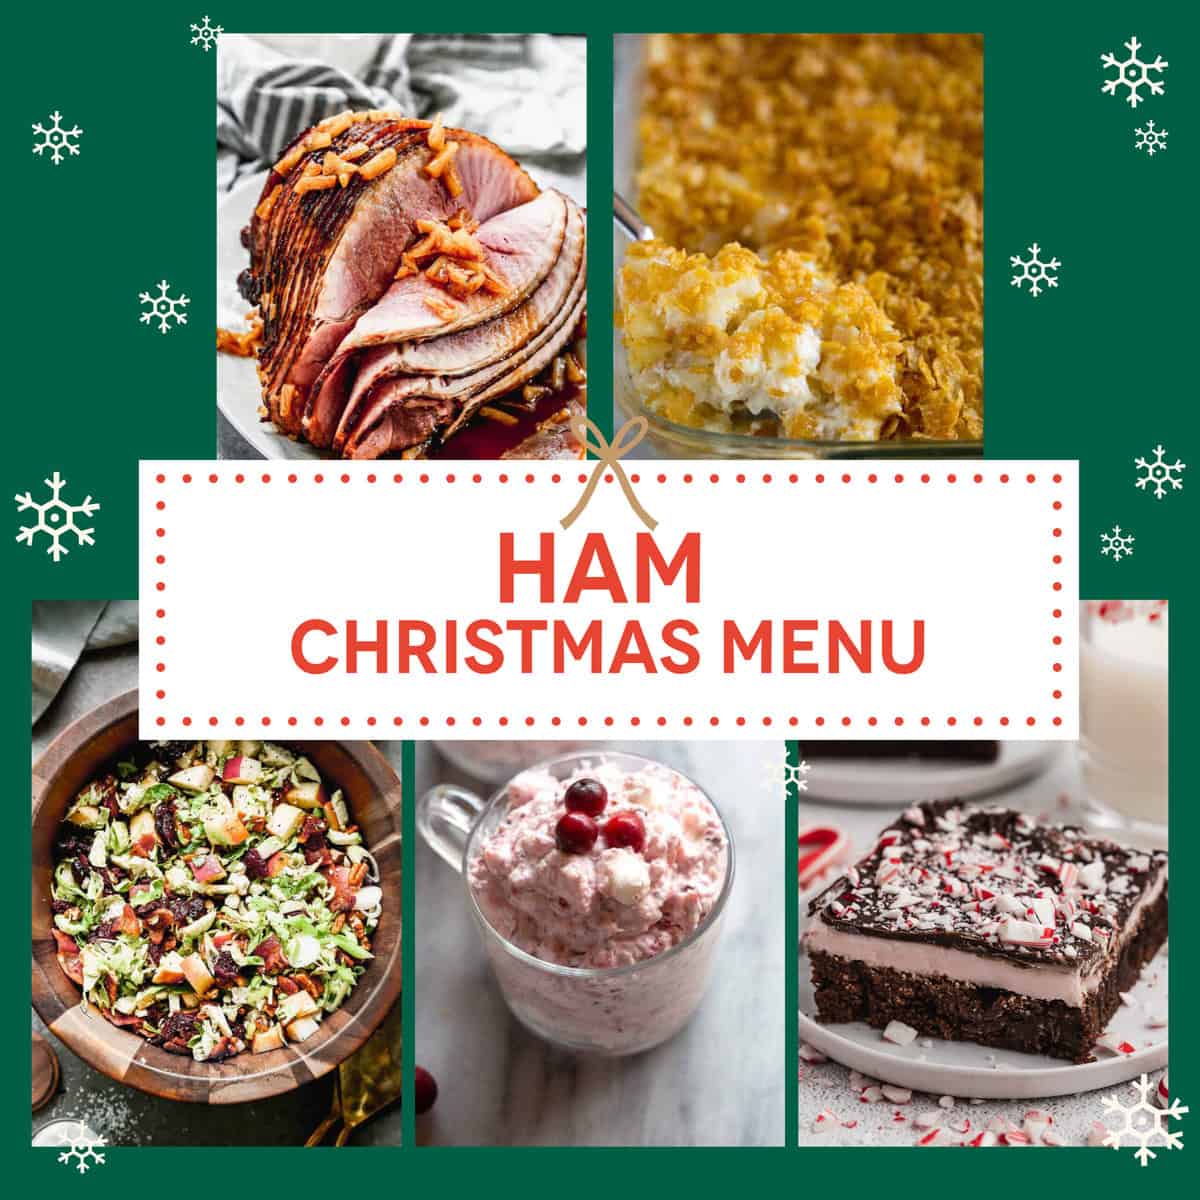 A graphic showing an easy Christmas Dinner menu with Baked Ham as the main dish.